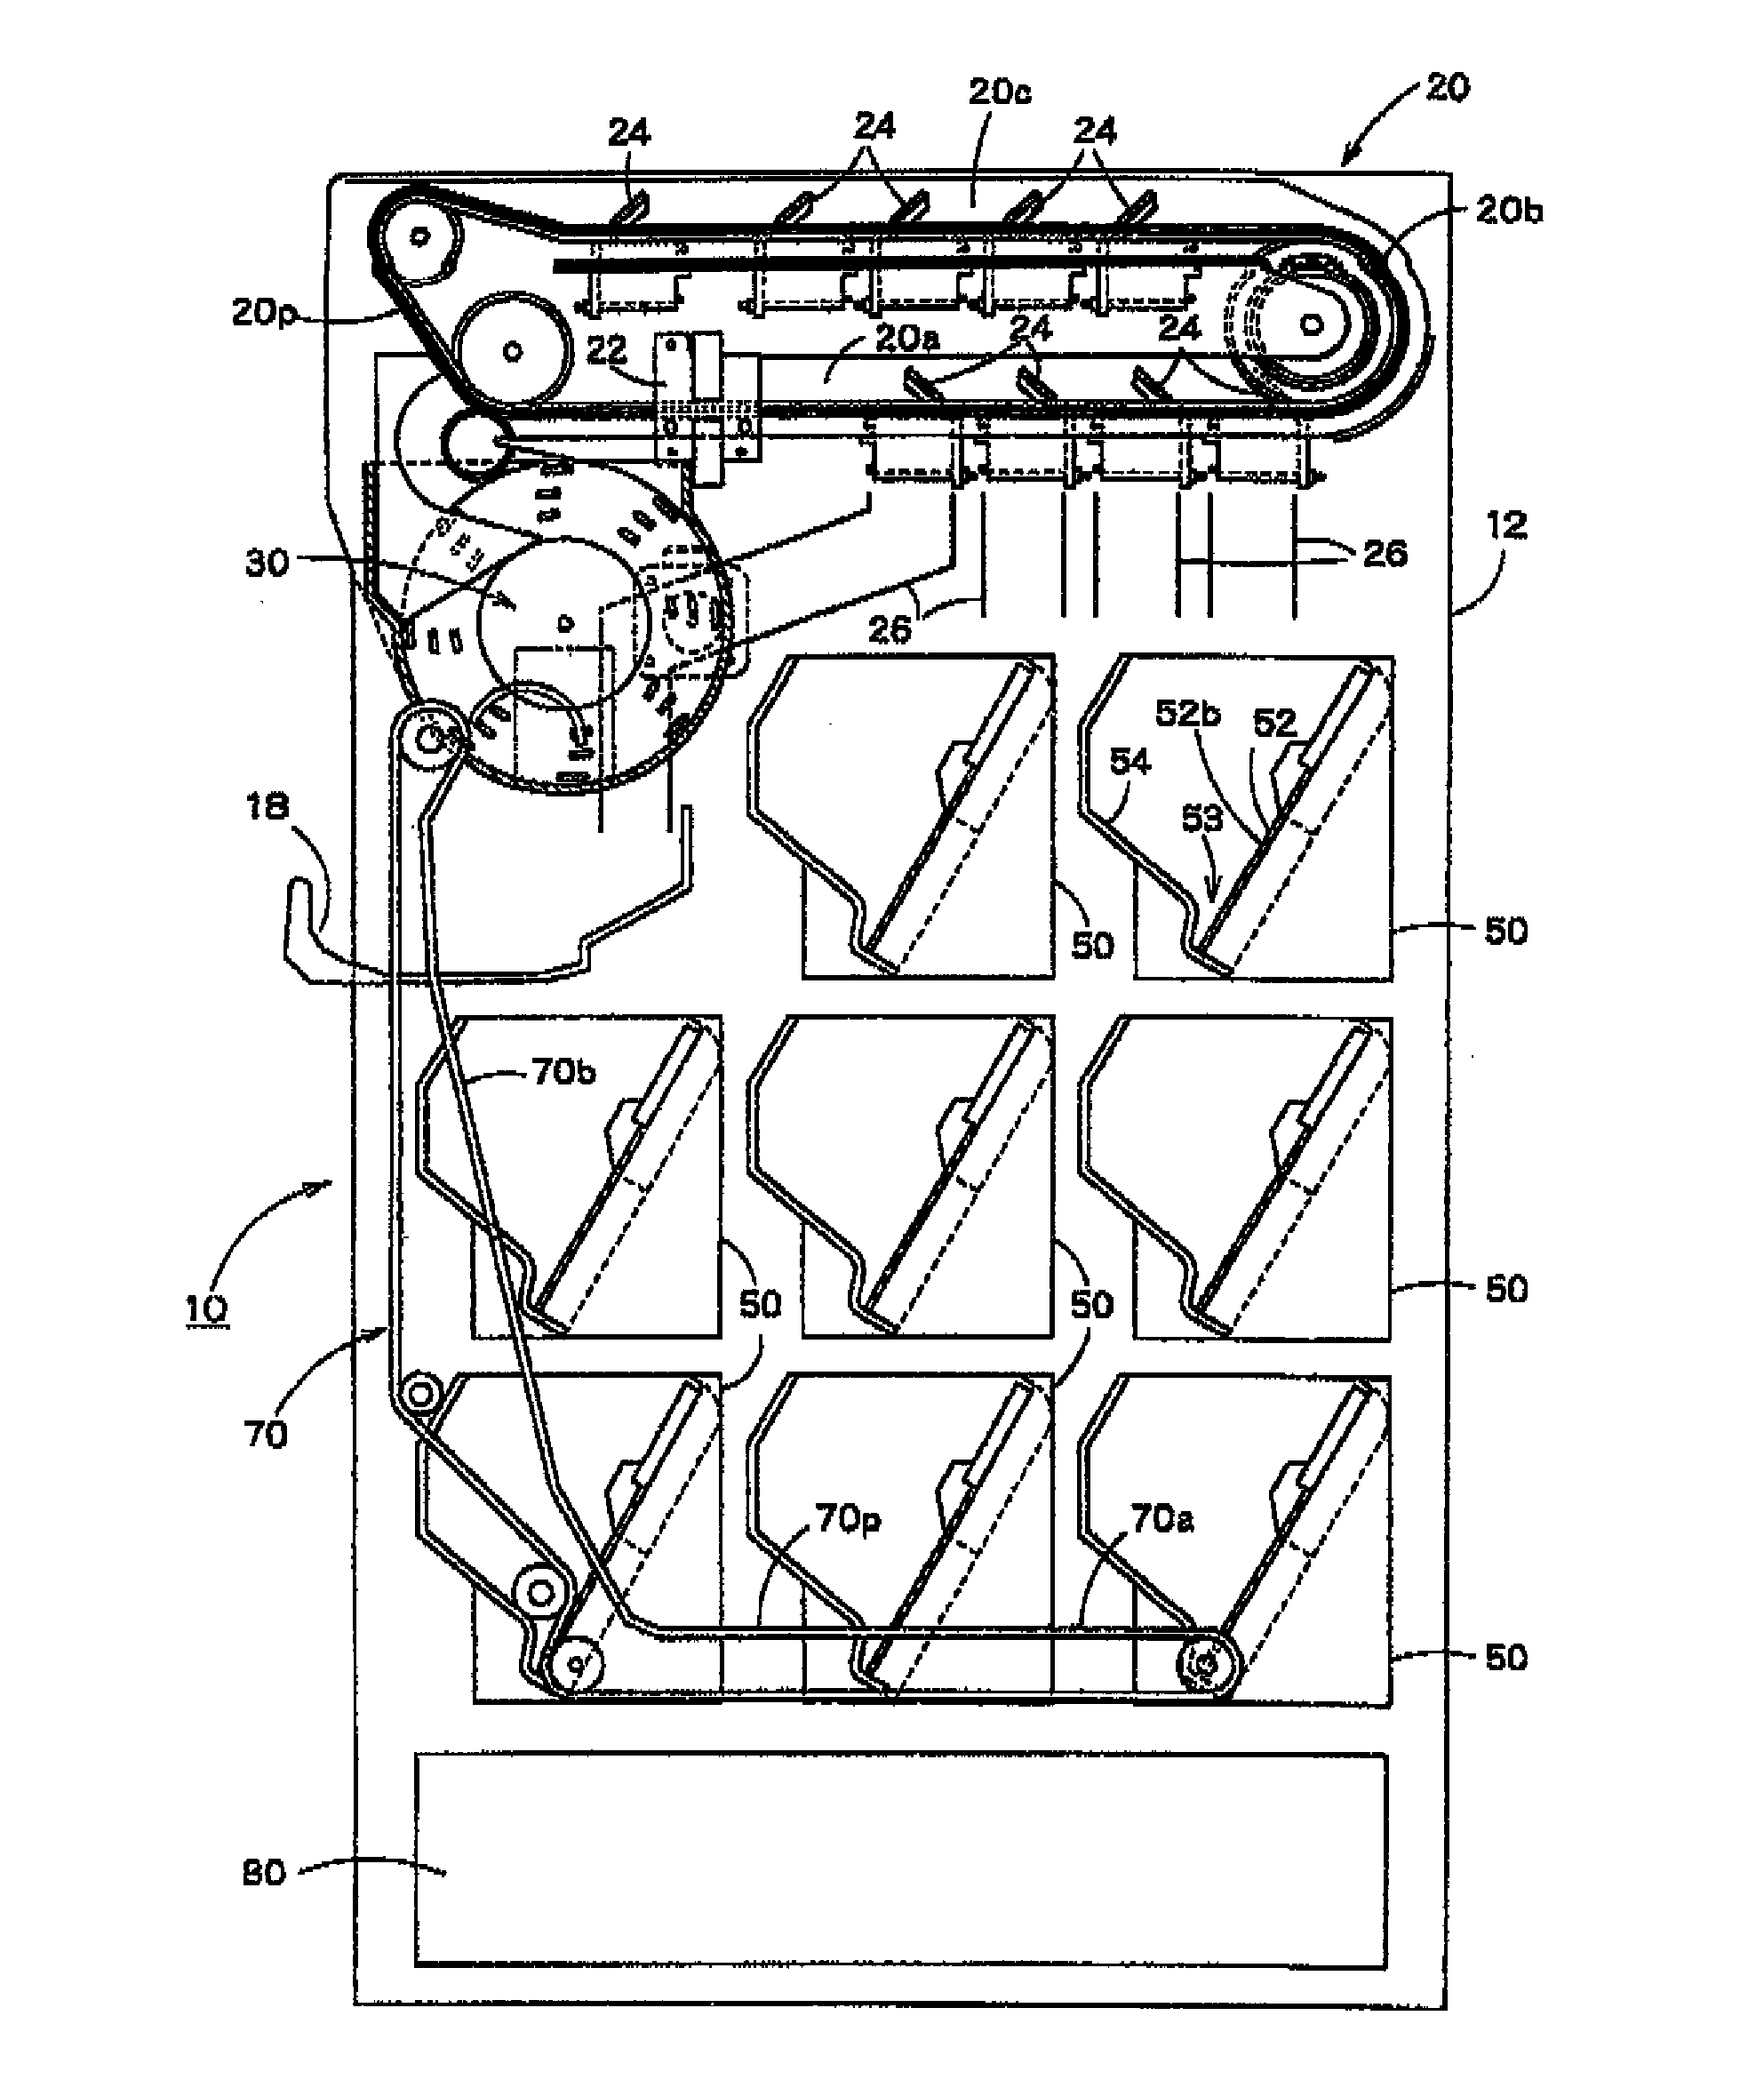 Coin depositing and dispensing machine